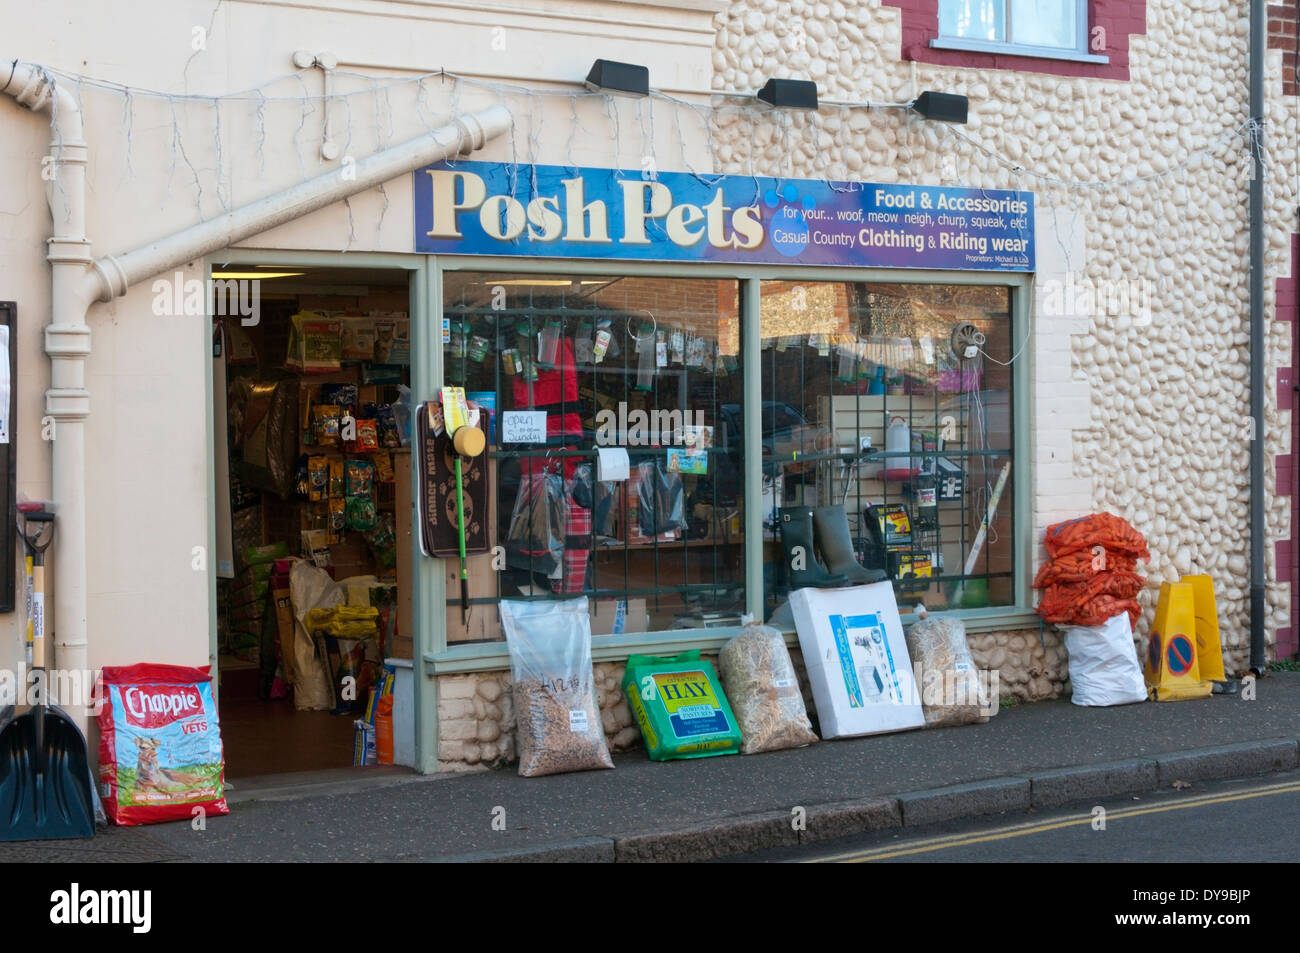 The premises of Posh Pets selling pet food & accessories with riding clothing in Holt, Norfolk. Stock Photo